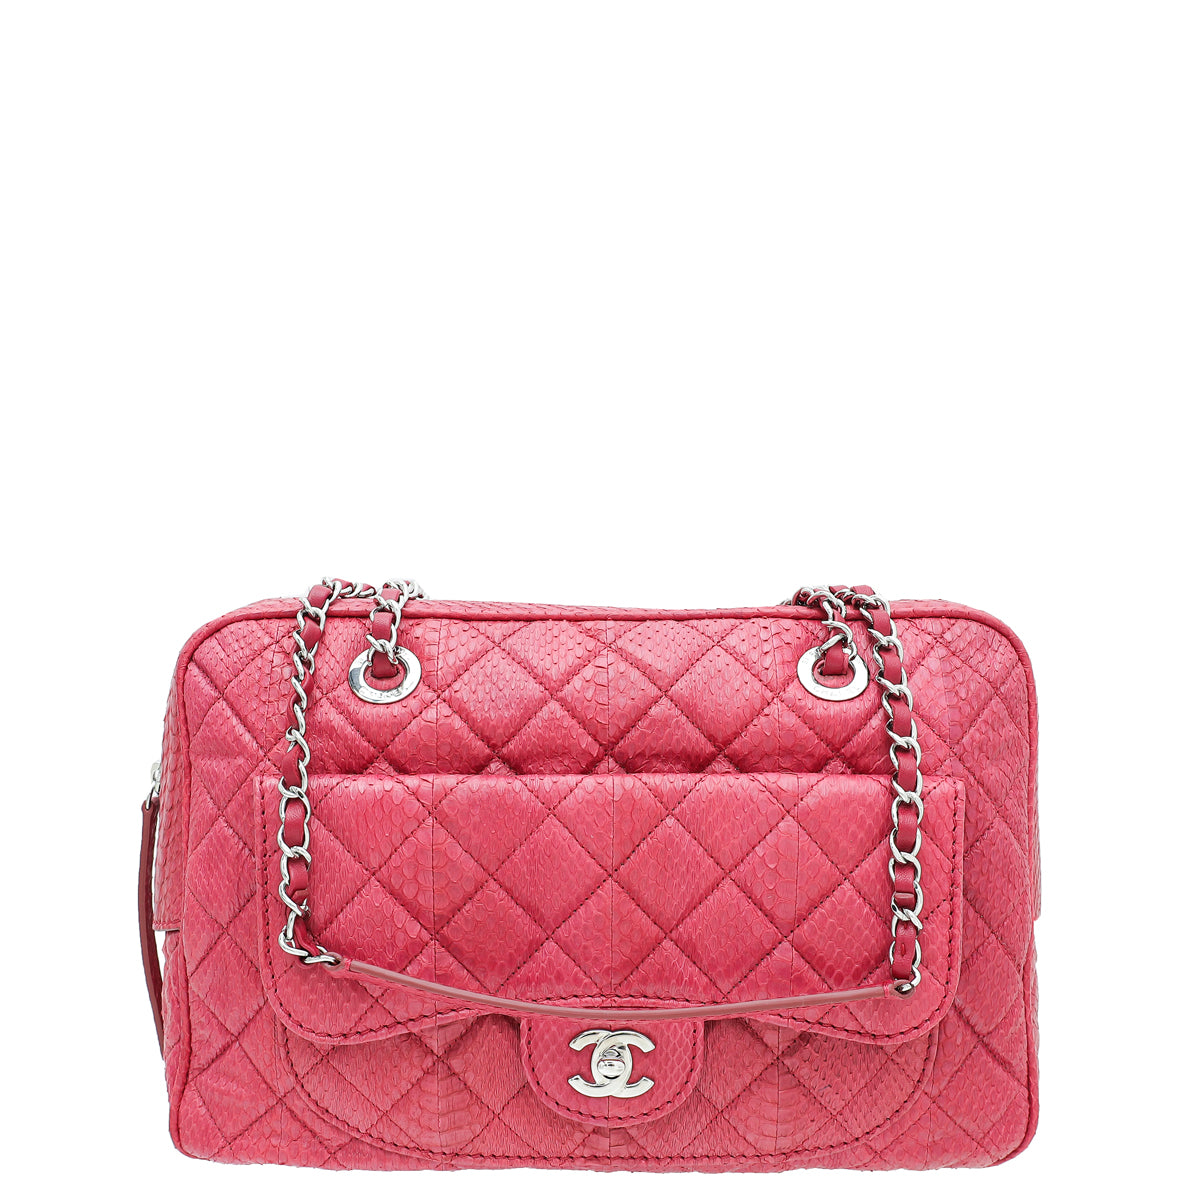 Chanel 18K Red Black Ombre Iridescent Python Mini Flap Bag RHW